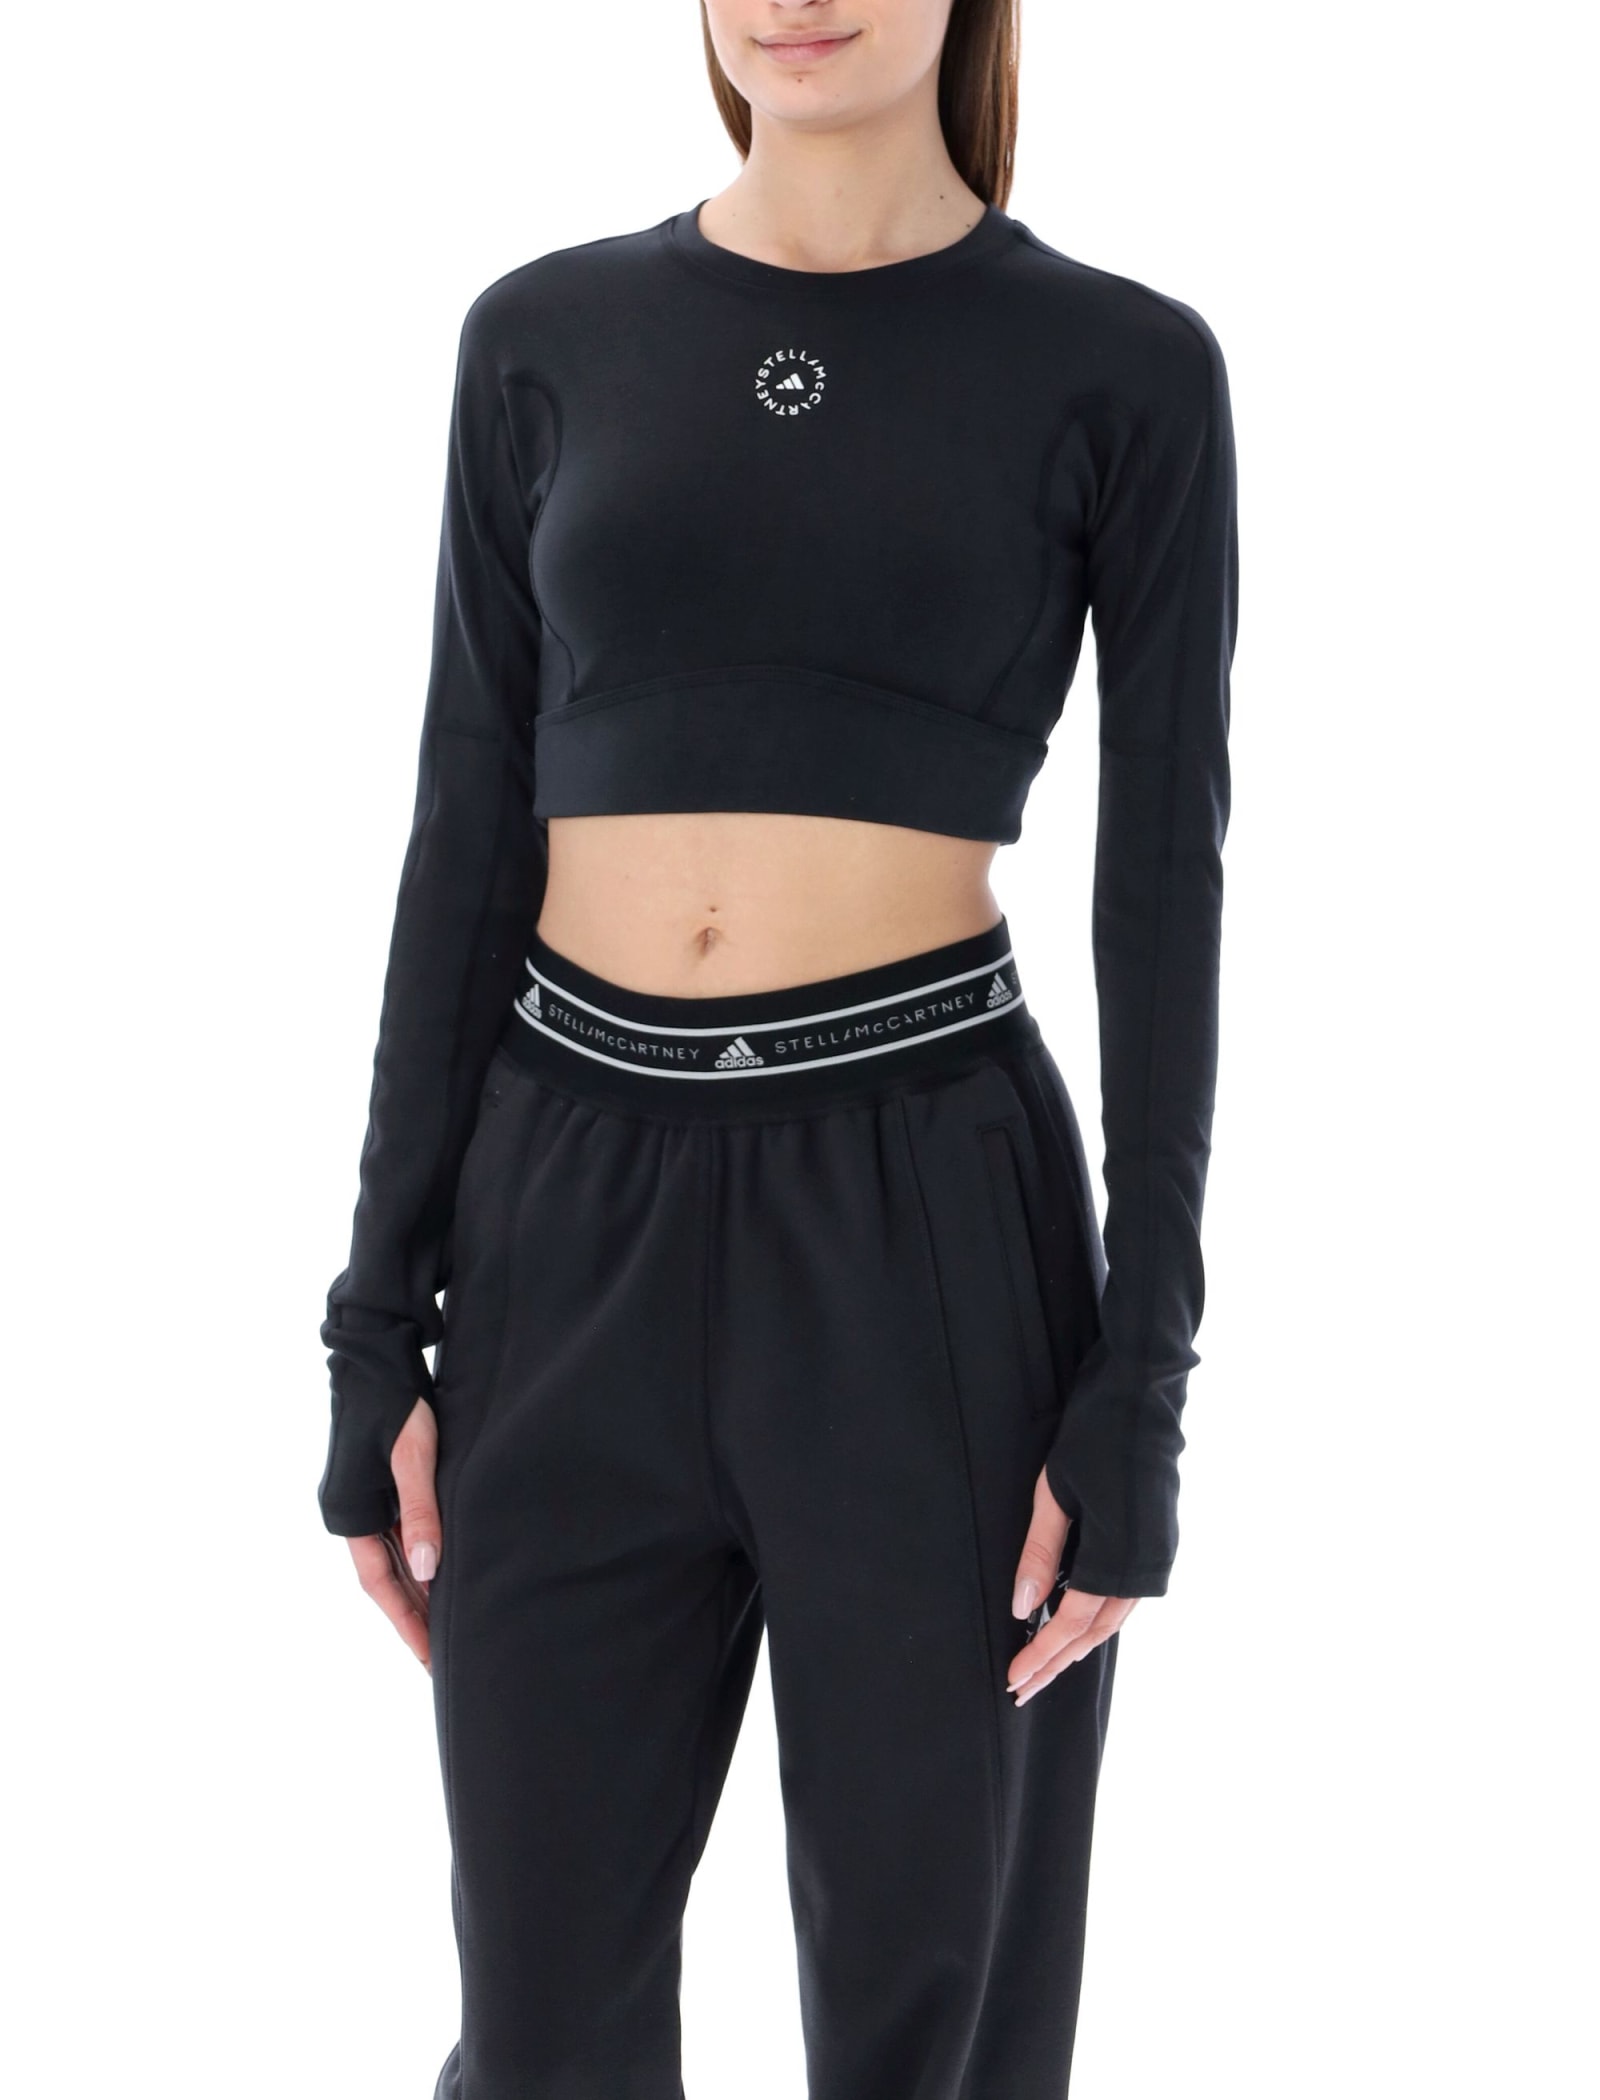 Adidas by Stella McCartney L/s Cropped Active Top